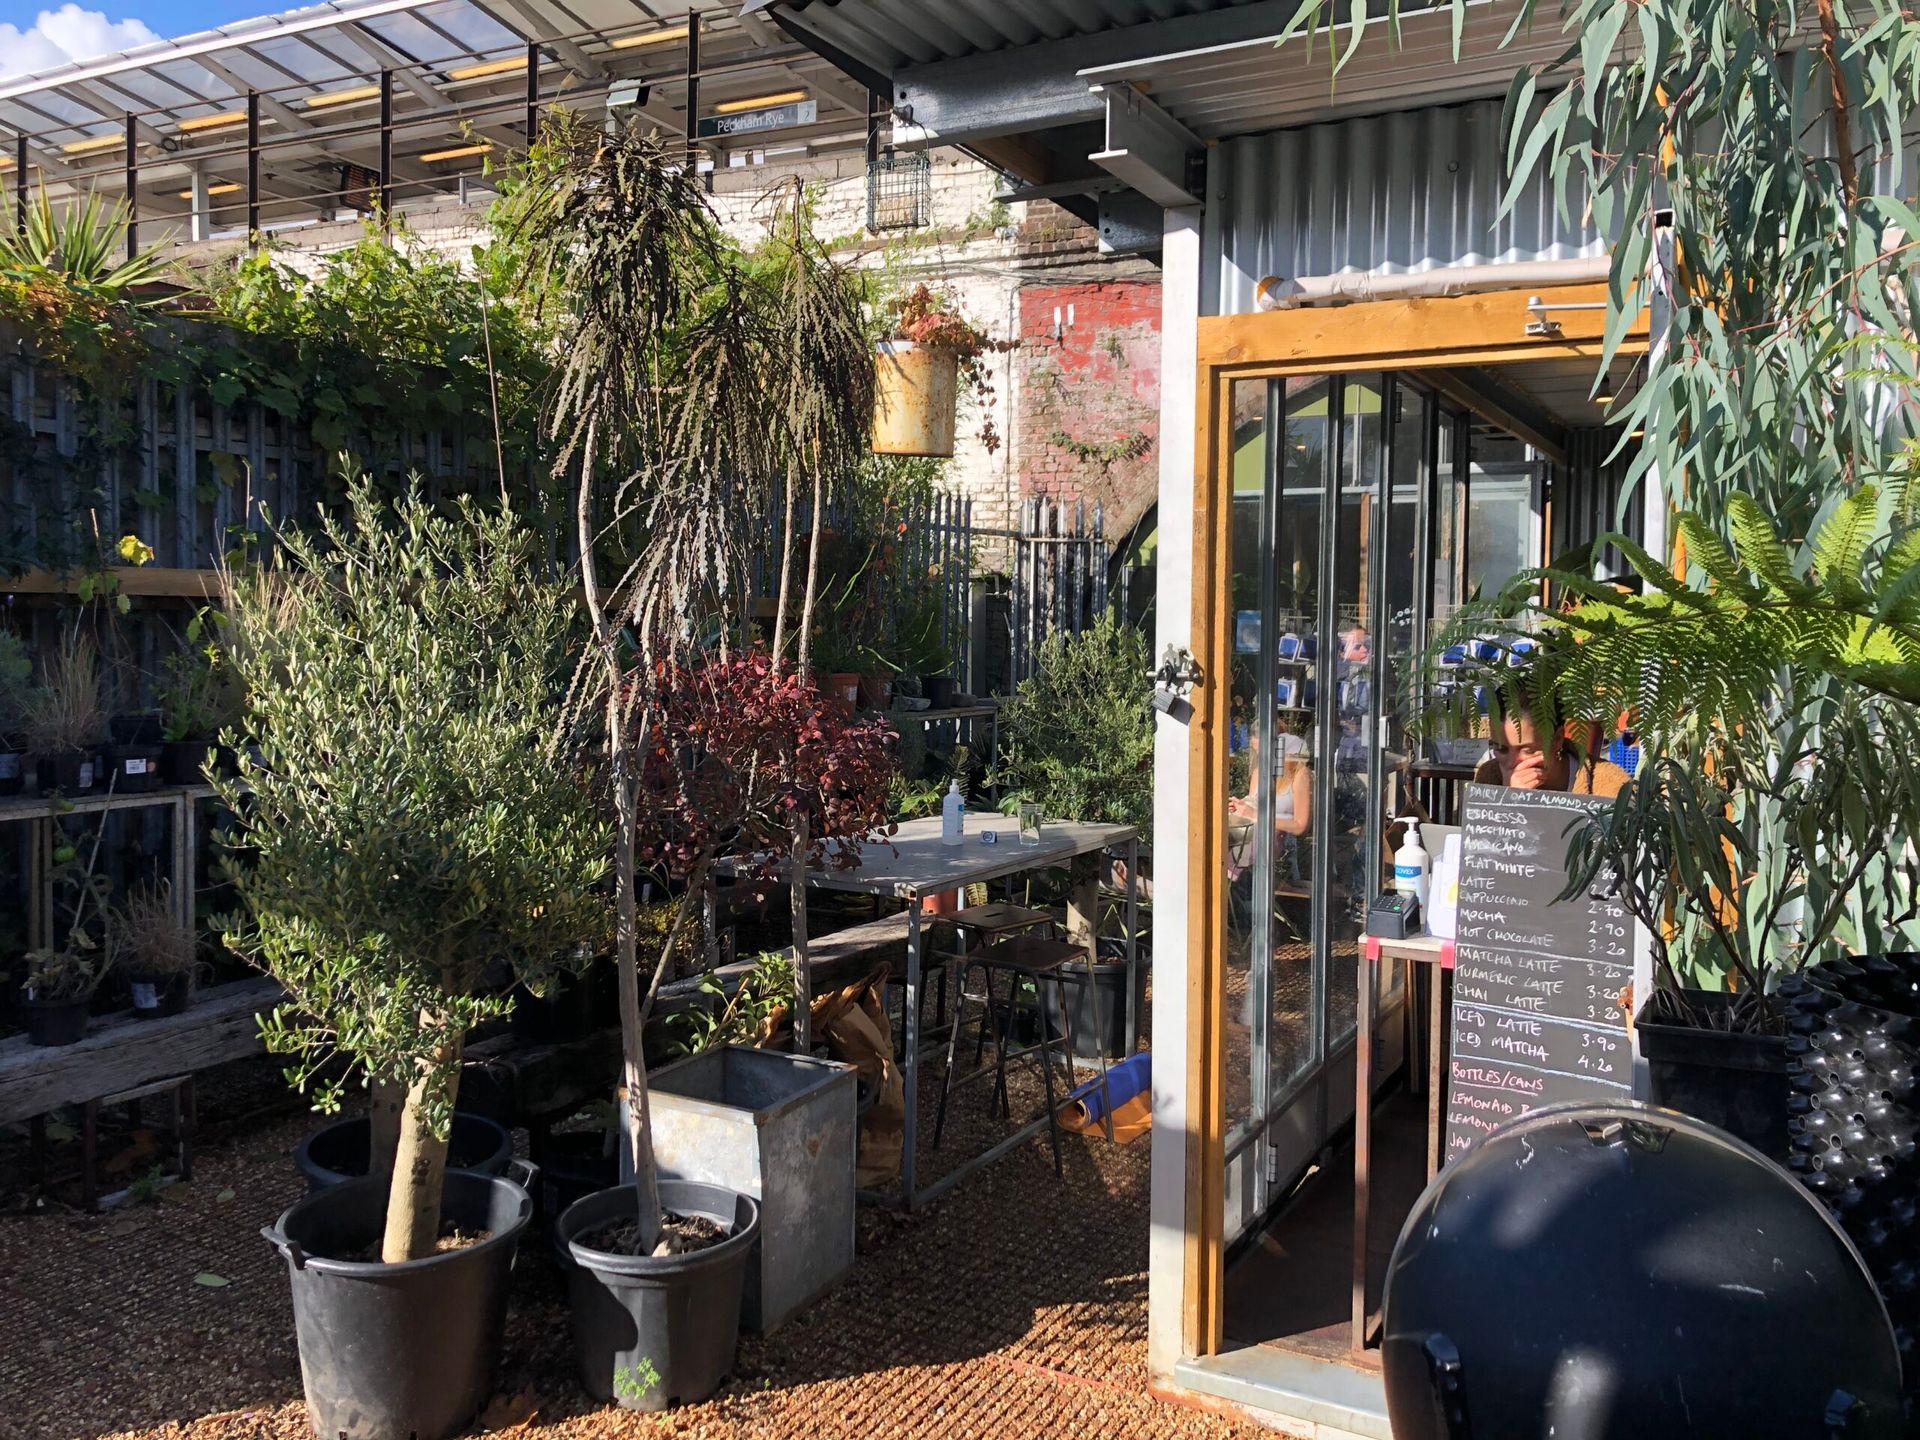 Plants in pots, but has a metal shack selling lattes etc, there are wooden tables. A grey wall in the background with a train station platform above. is actually a cafe